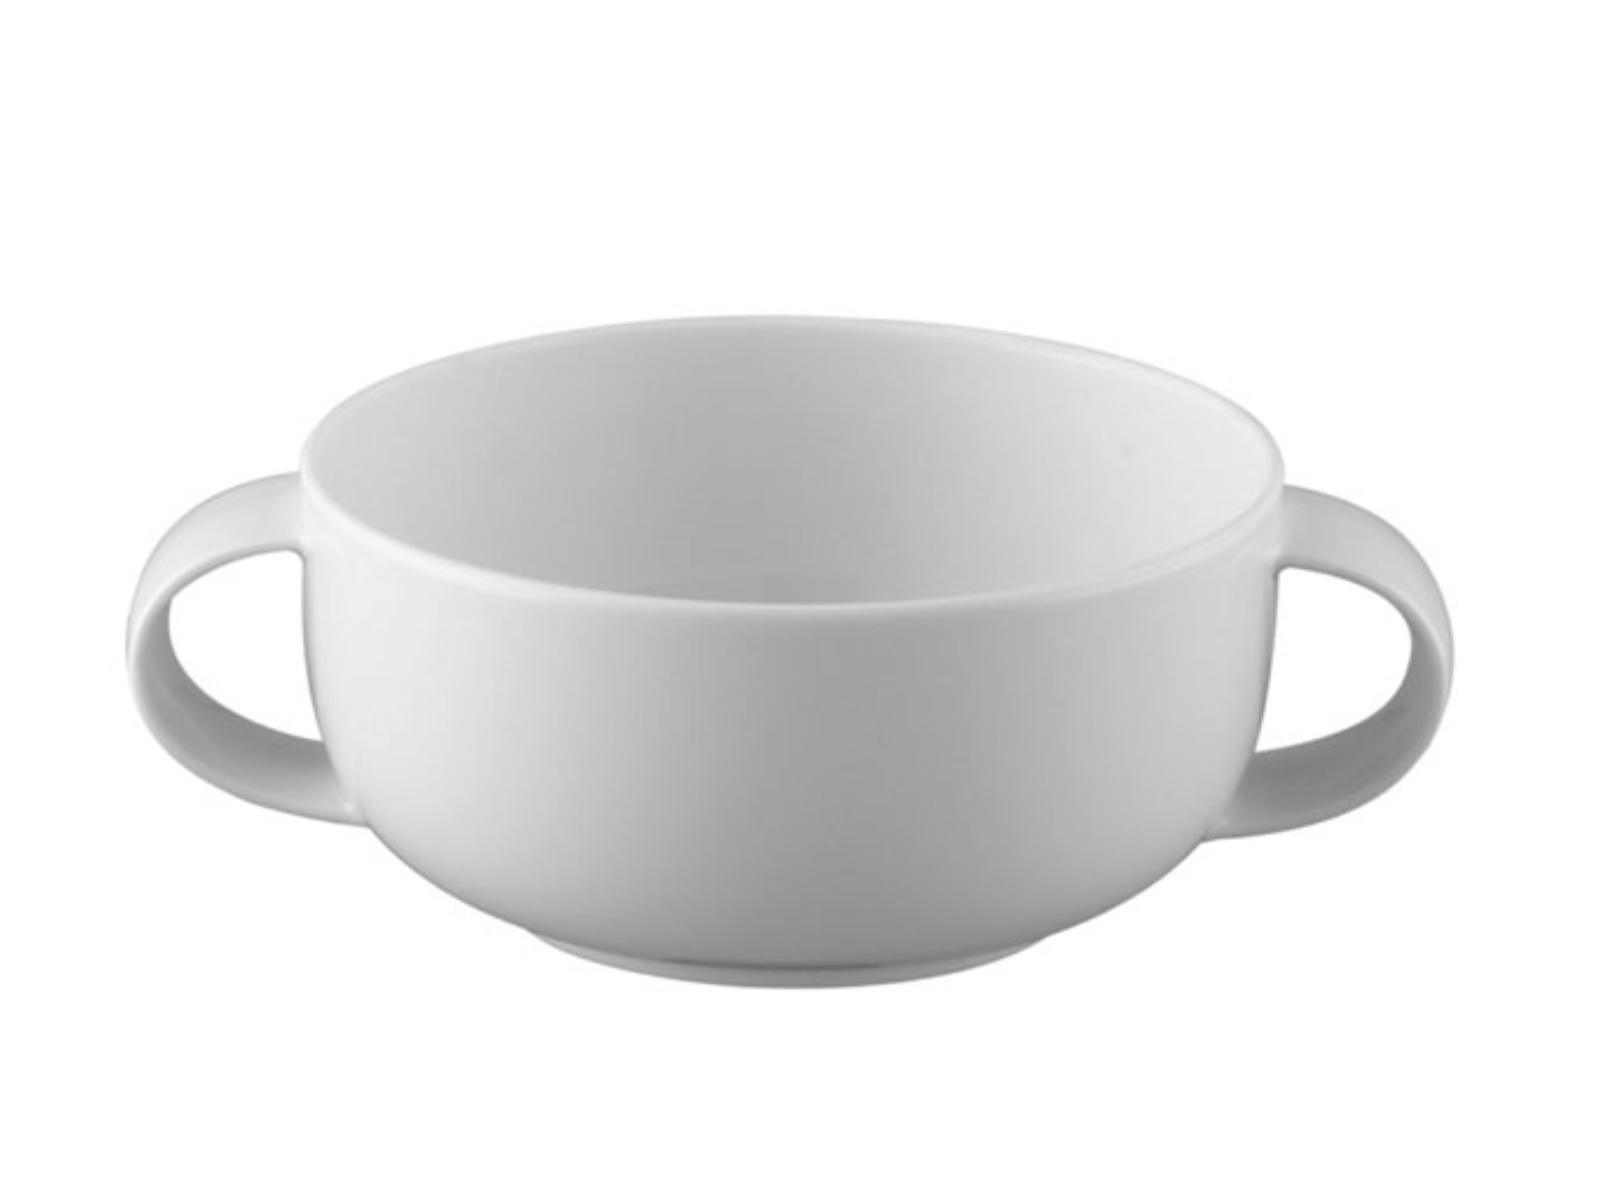 Rosenthal Suomi Weiss Suppen-Obertasse 0,3 l